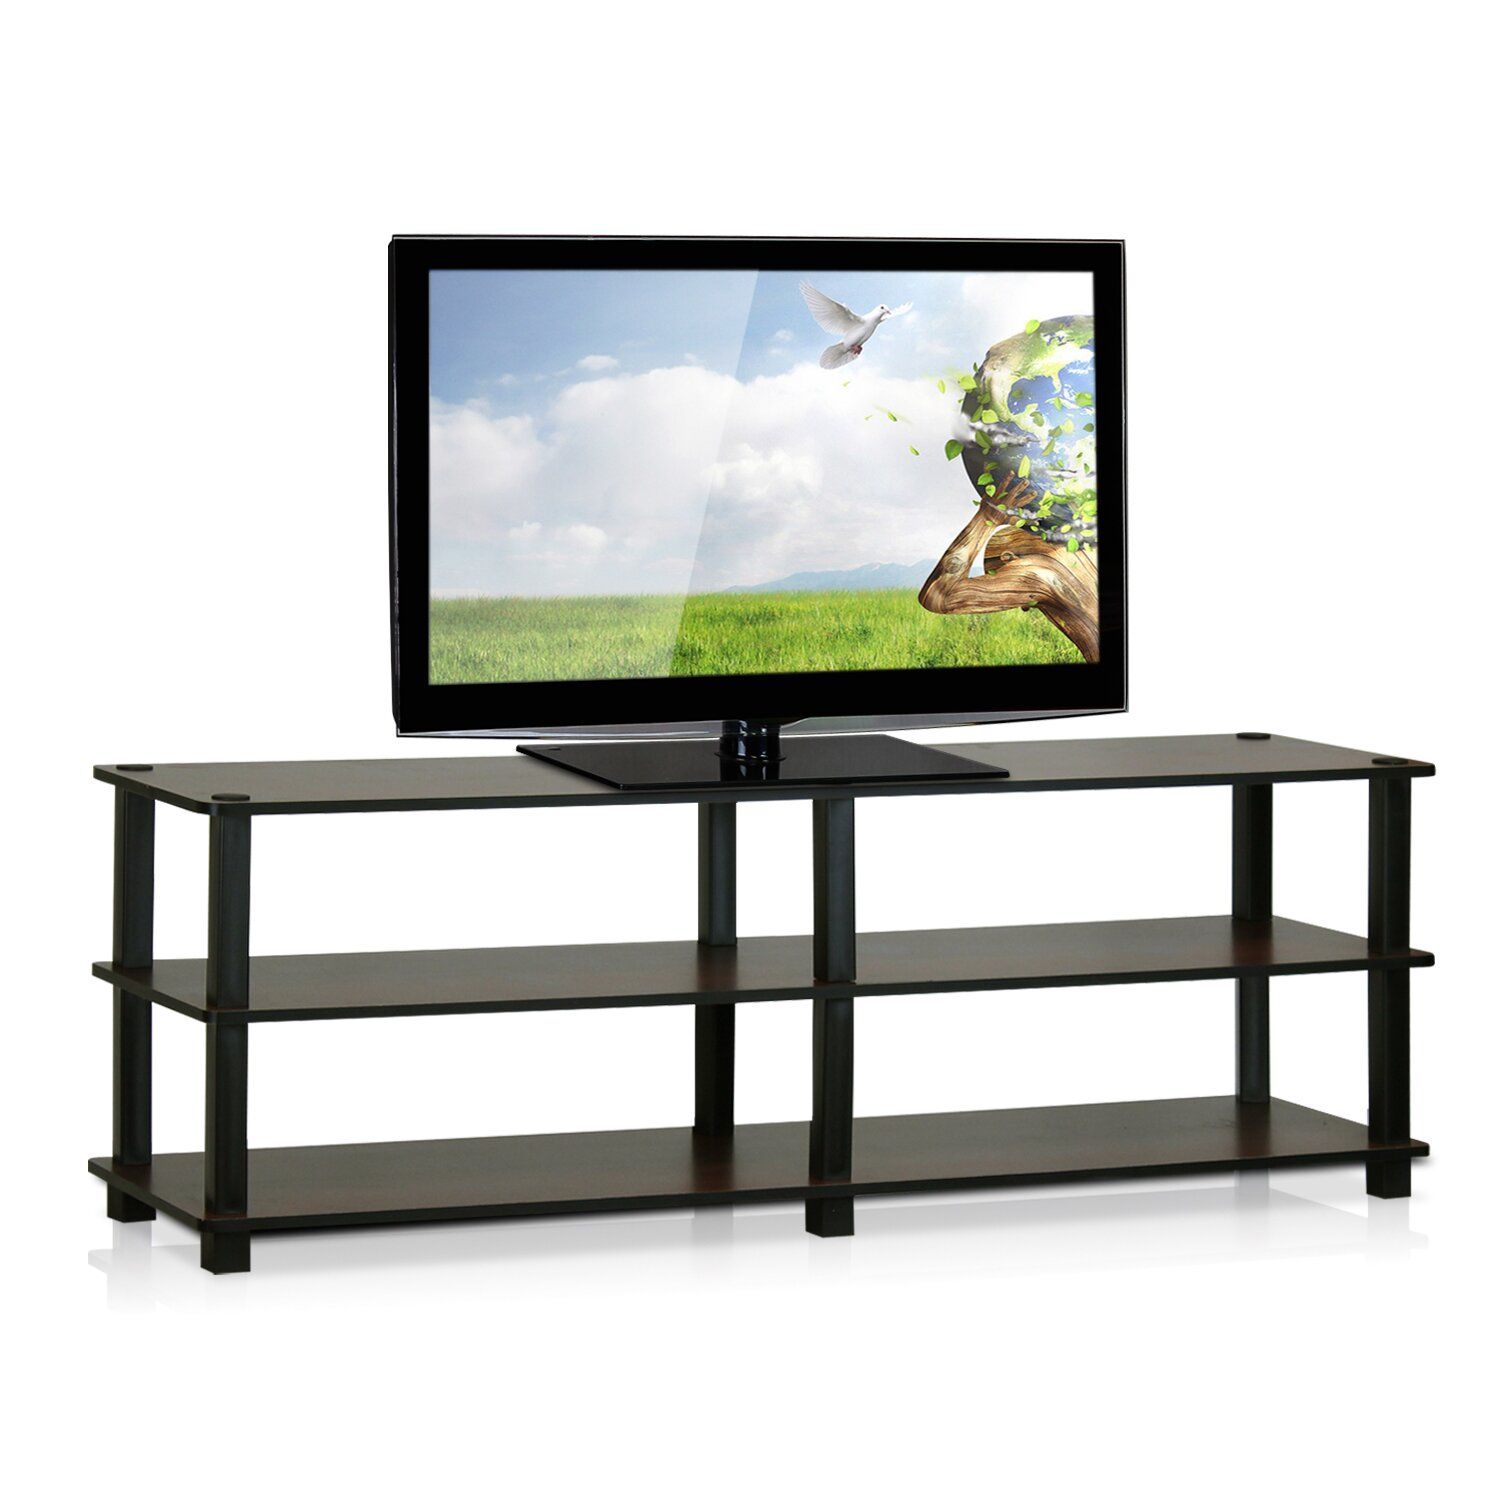 Furinno Furinno Turn S Tube Tv Stand & Reviews | Wayfair In Narrow Tv Stands For Flat Screens (Photo 10 of 15)